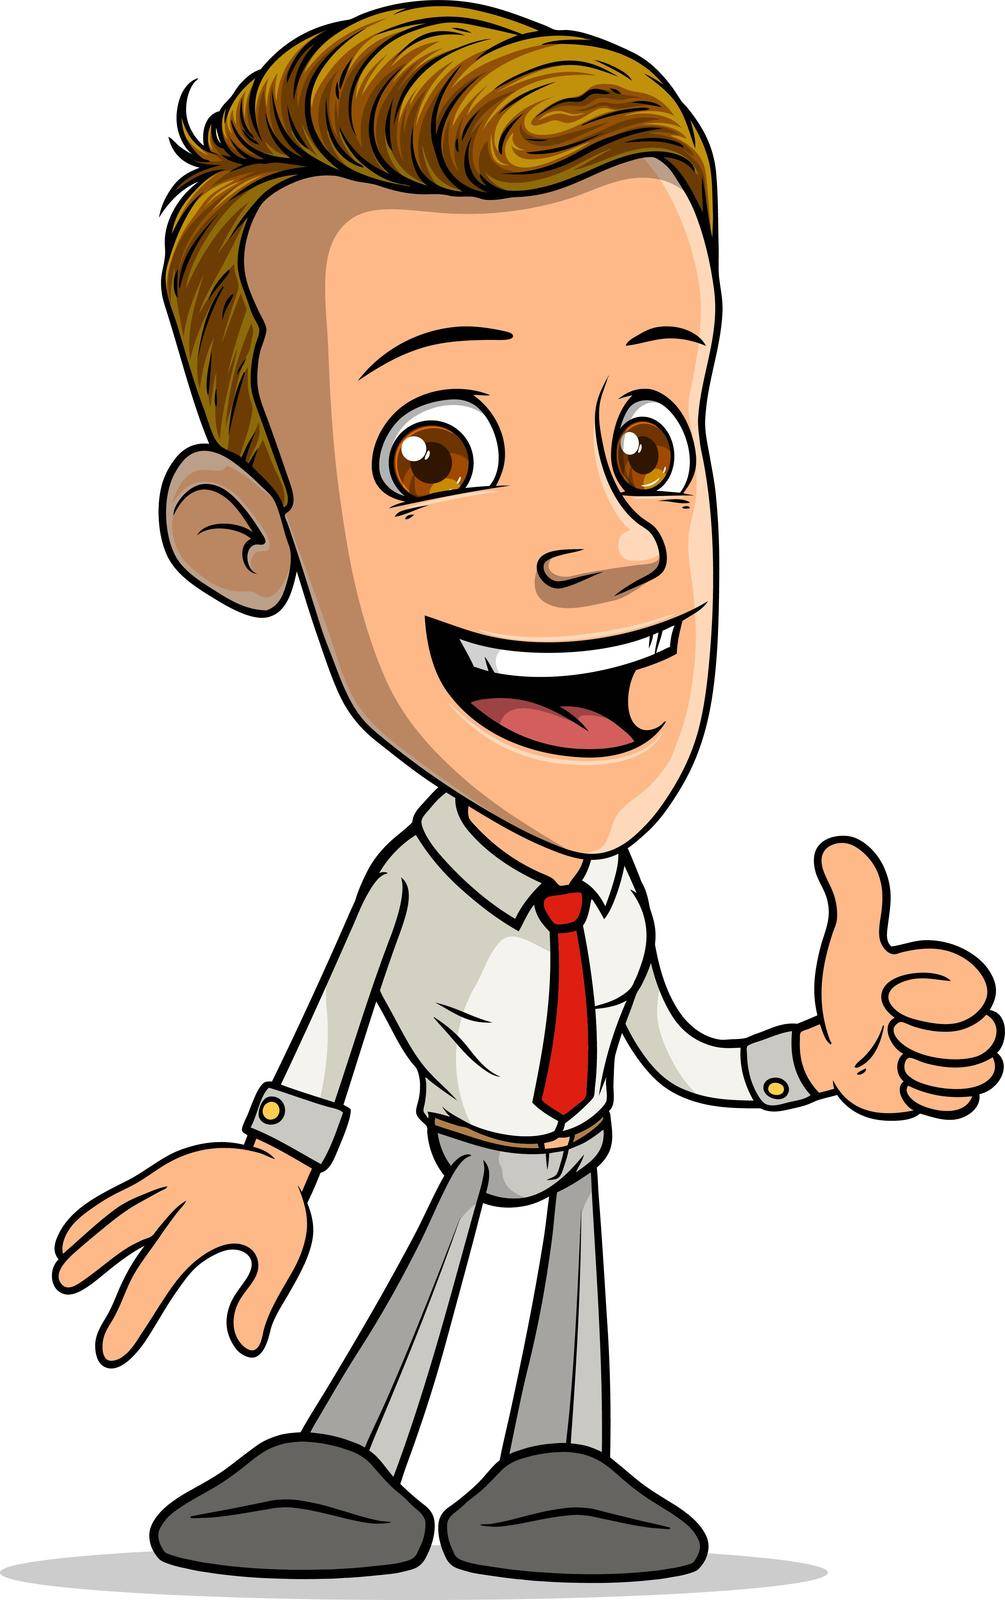 Cartoon funny boy character showing thumbs up by GB_Art